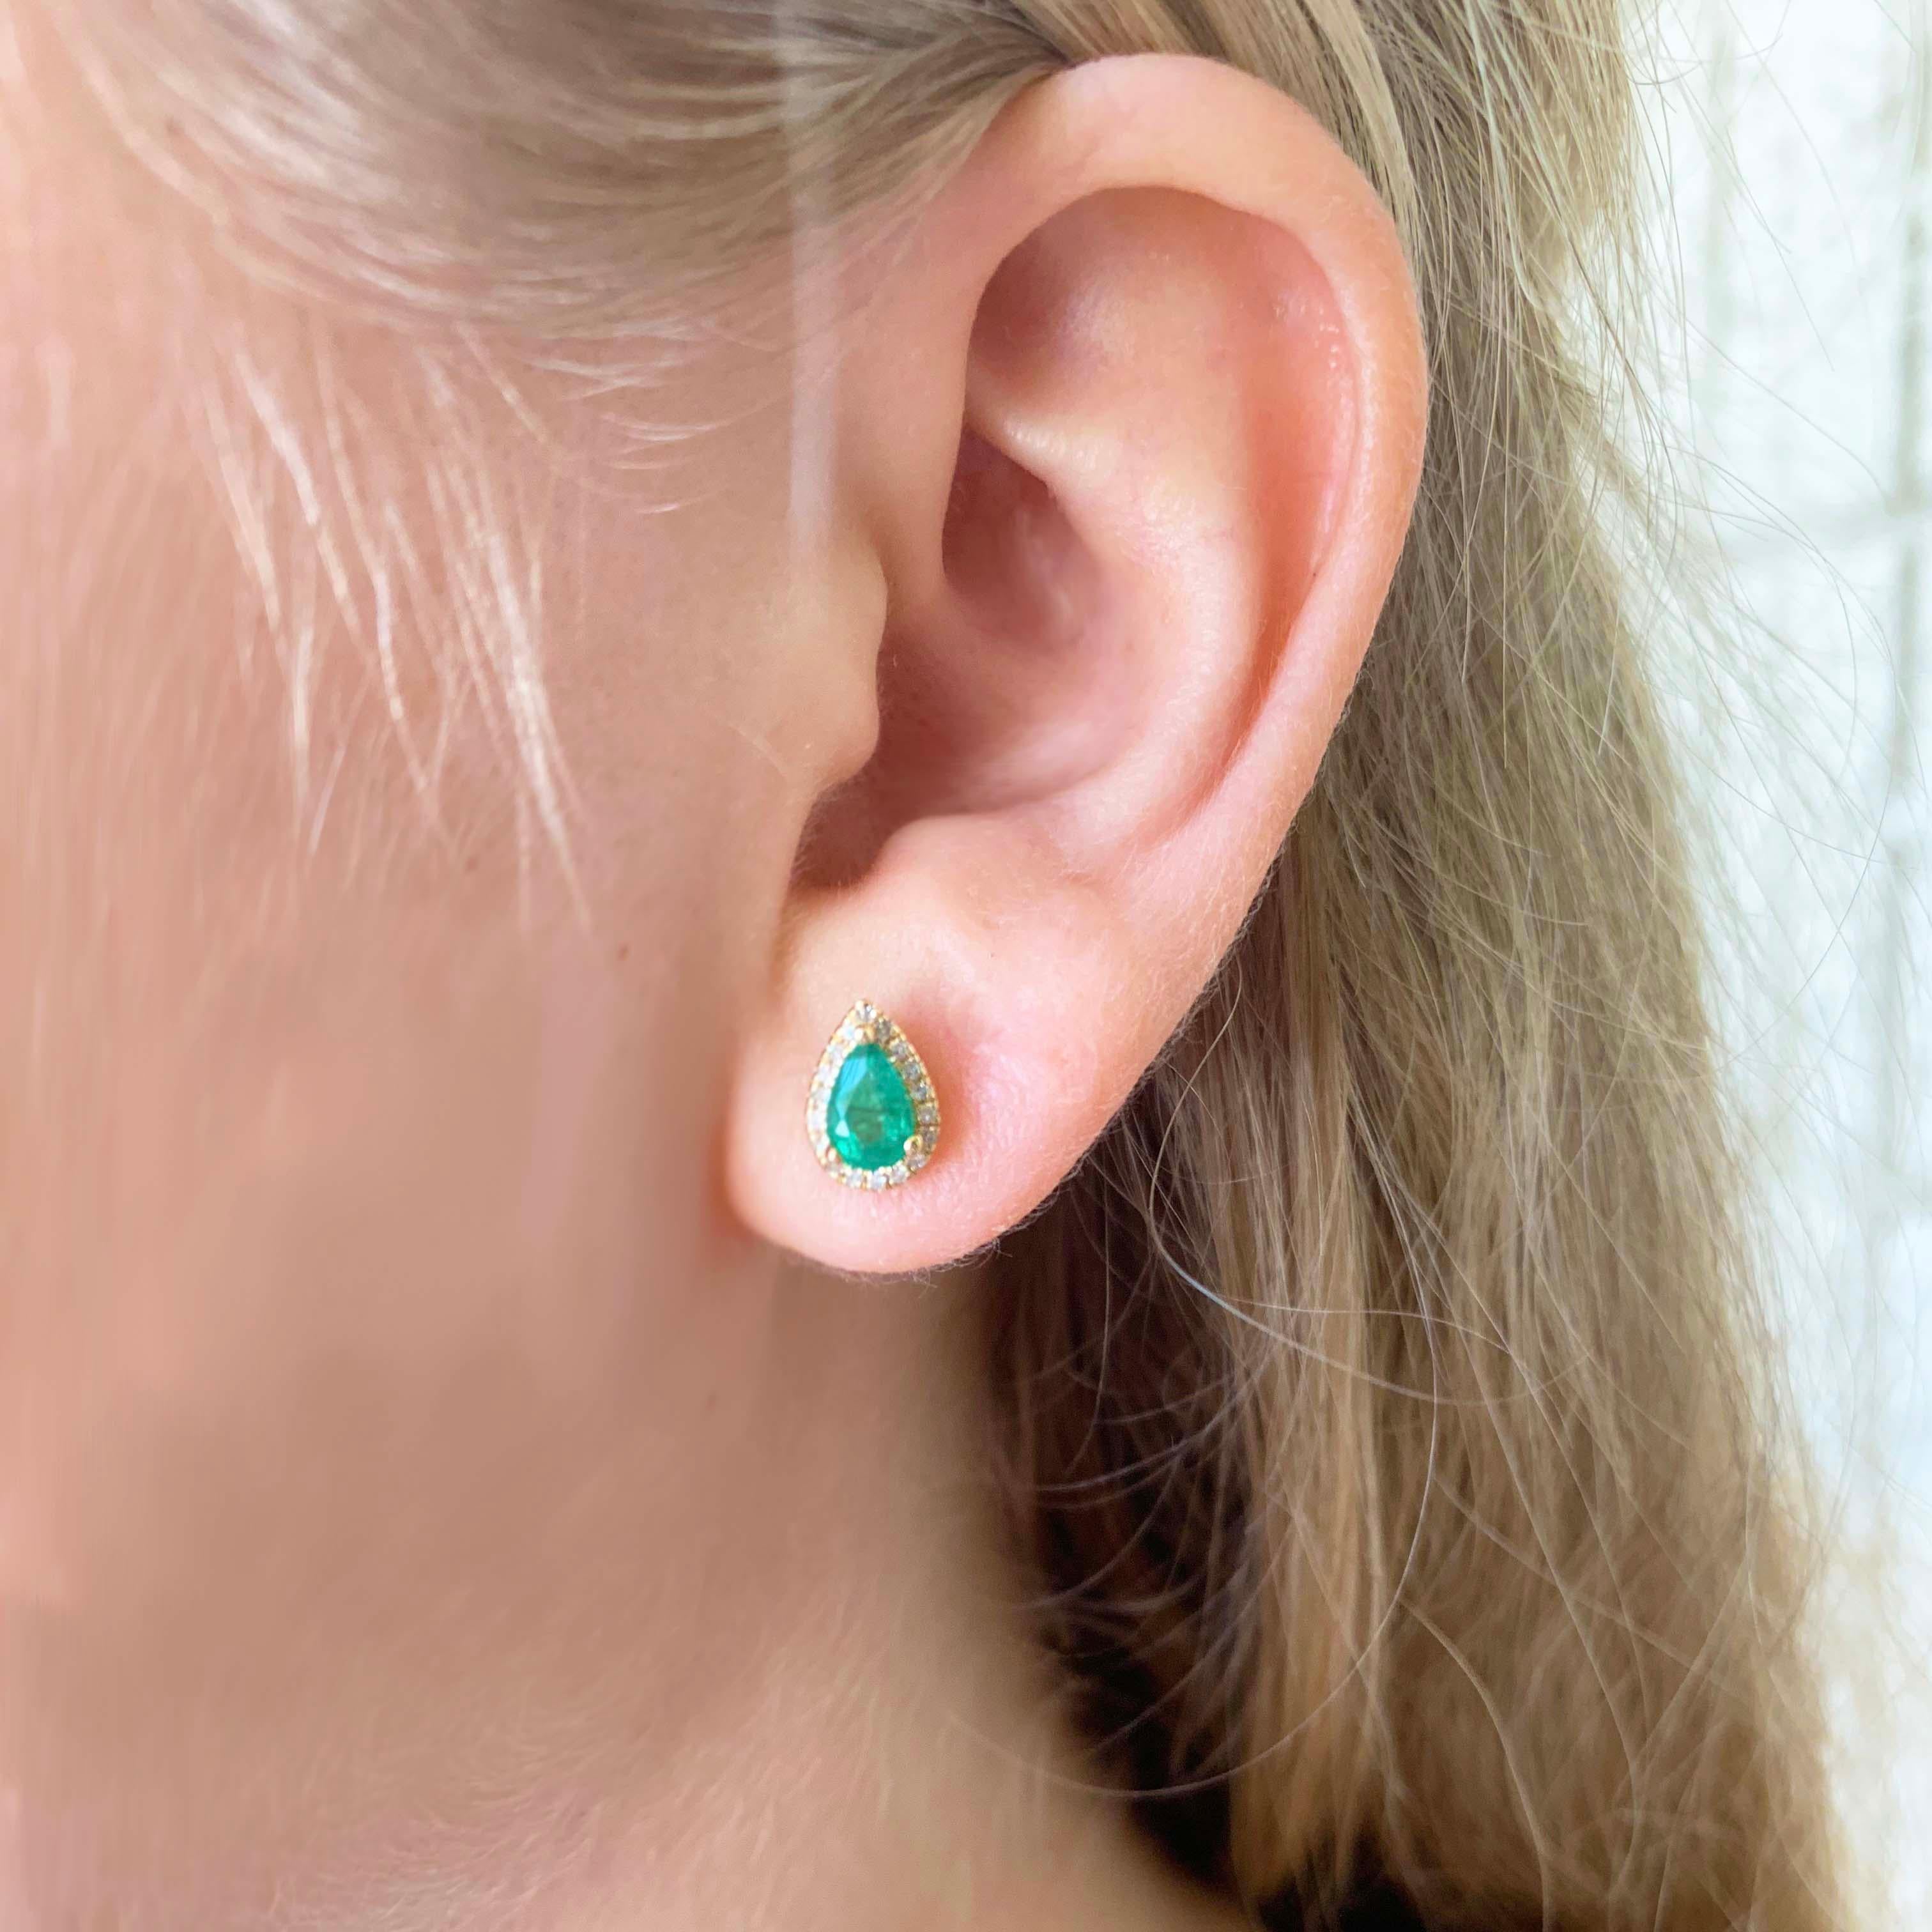 These vibrant genuine emerald and diamond stud earrings are so precious! With genuine, natural Columbian emeralds set in each stud earring. The Columbian emeralds have been cut into pear shapes that showcase their natural, bold green color